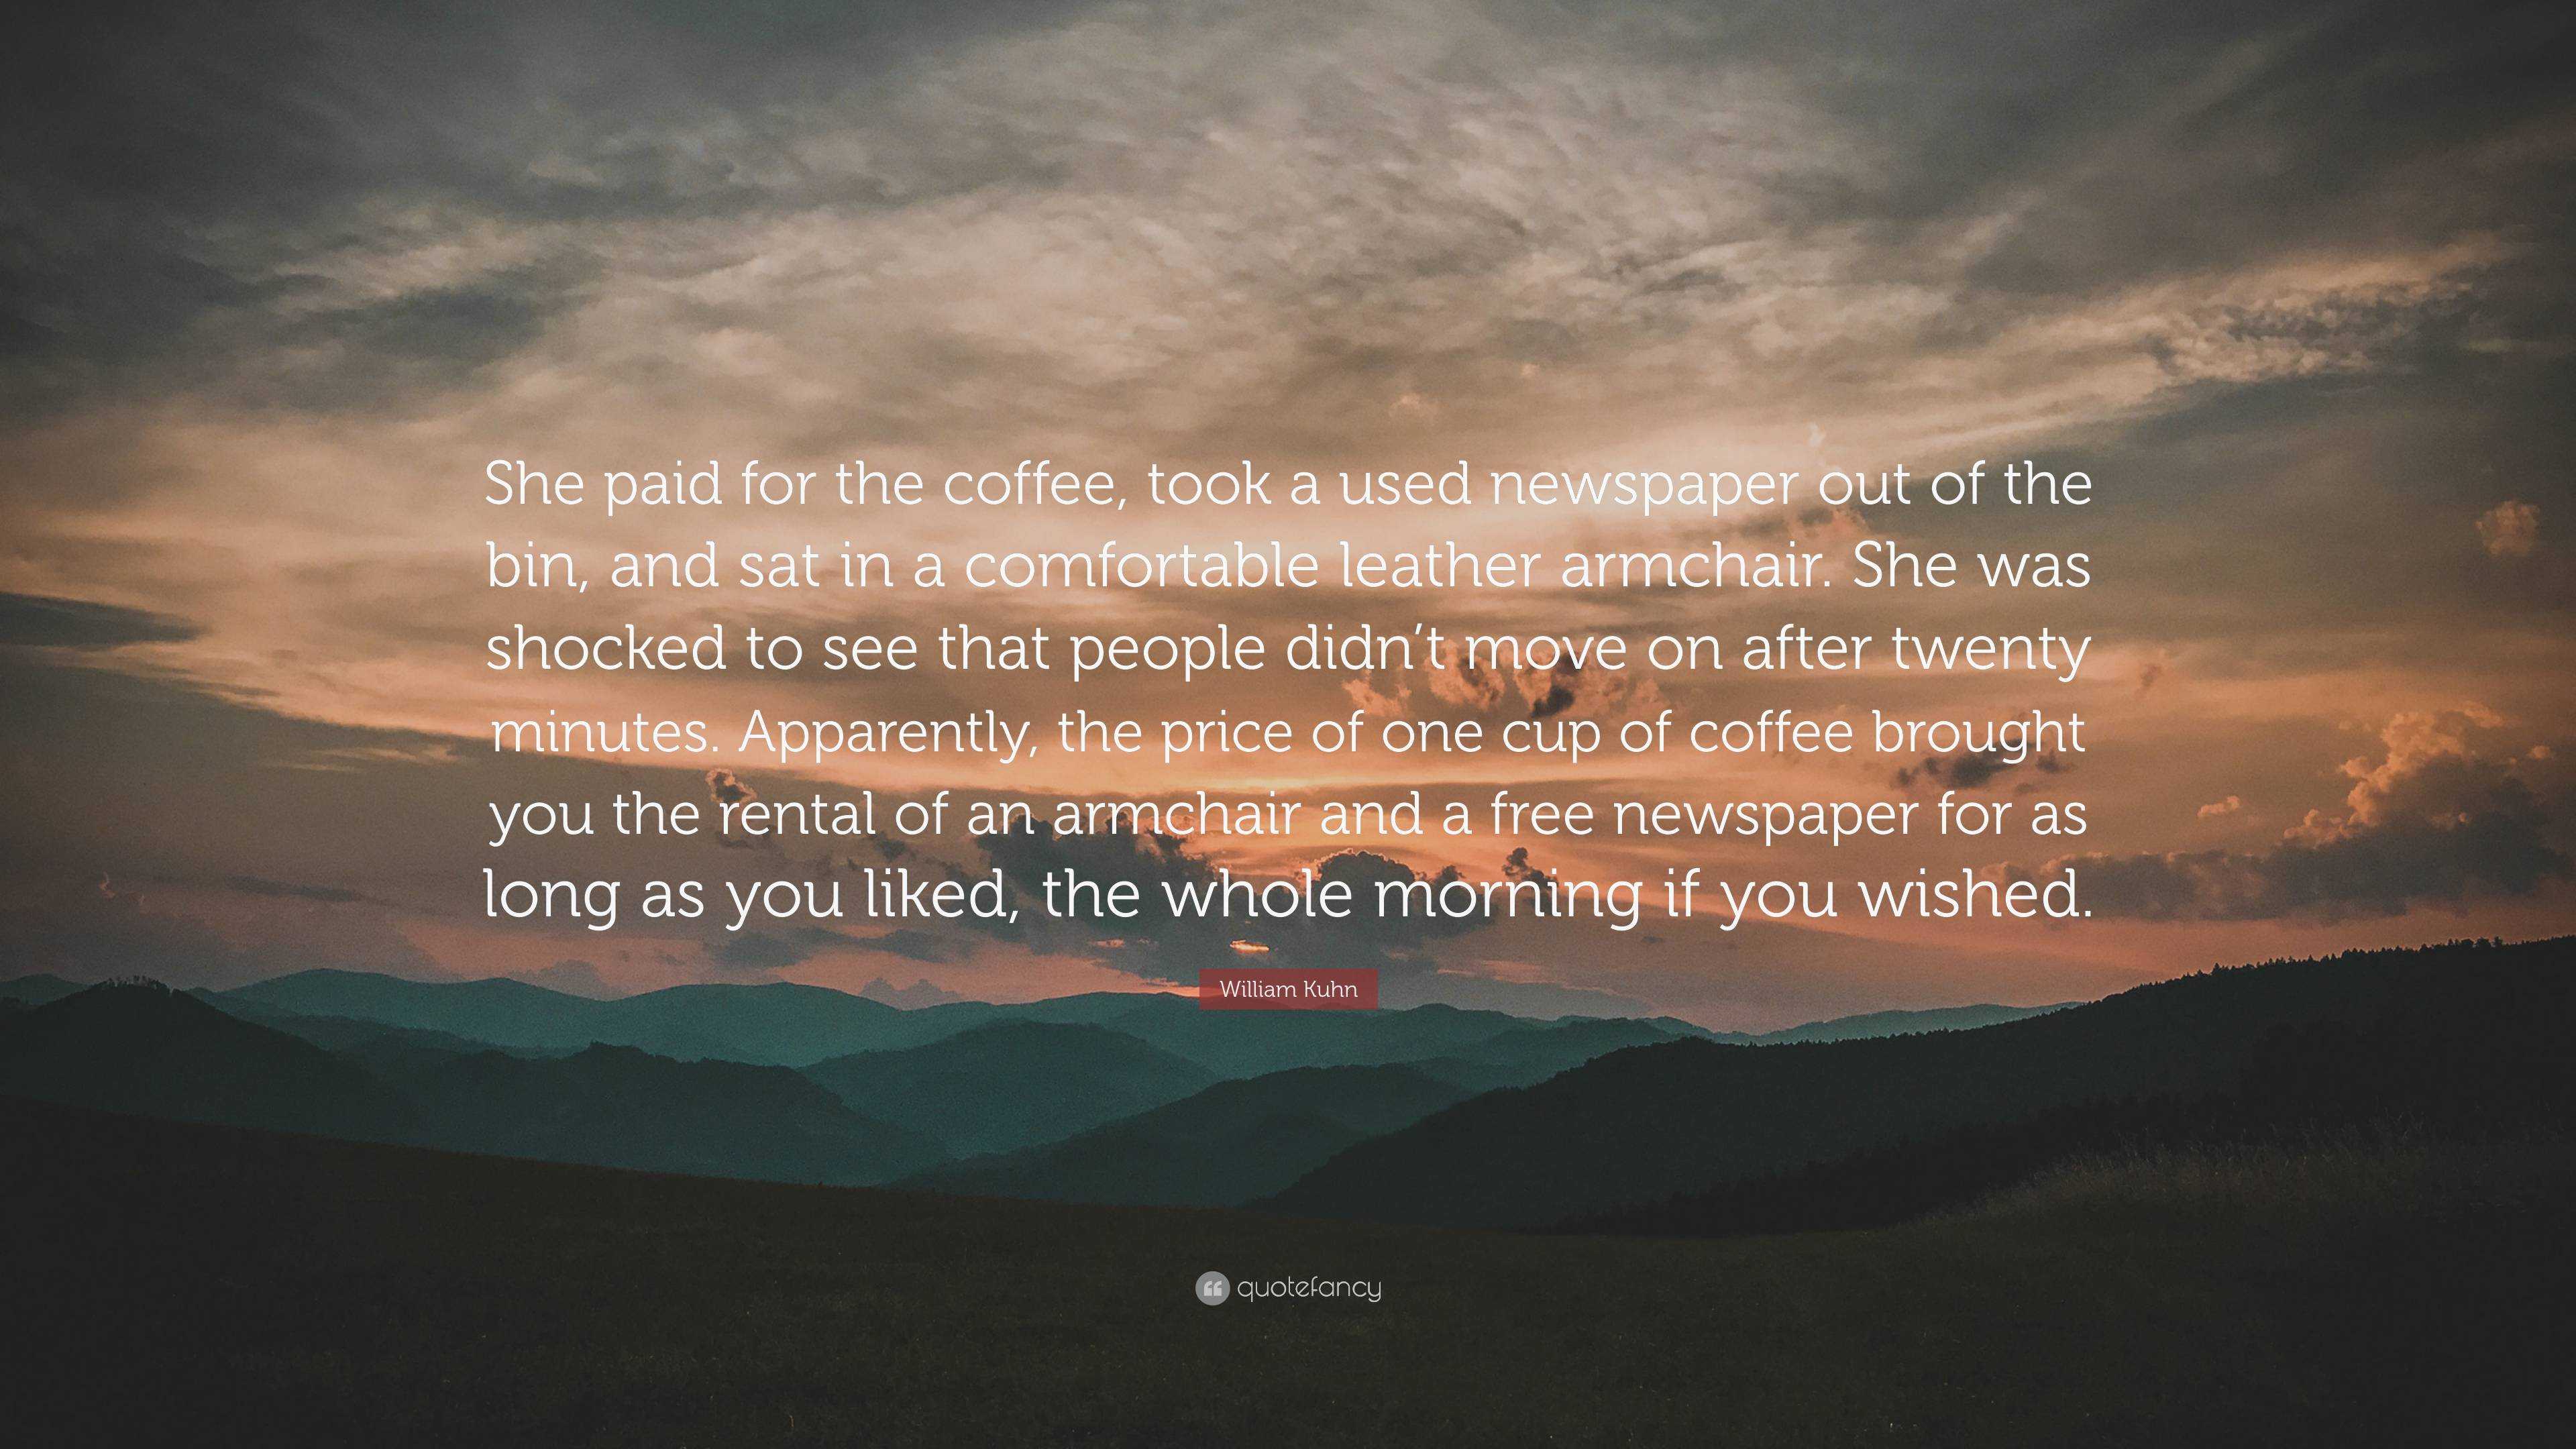 William Kuhn Quote: “She paid for the coffee, took a used newspaper out ...